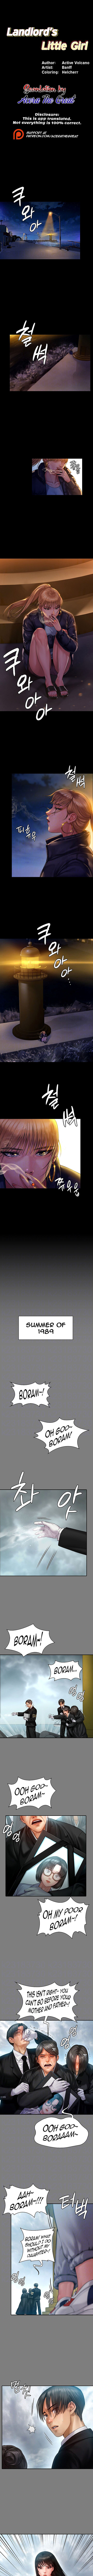 Panel Image 1 for chapter 152 of manhwa Queen Bee on read.oppai.stream